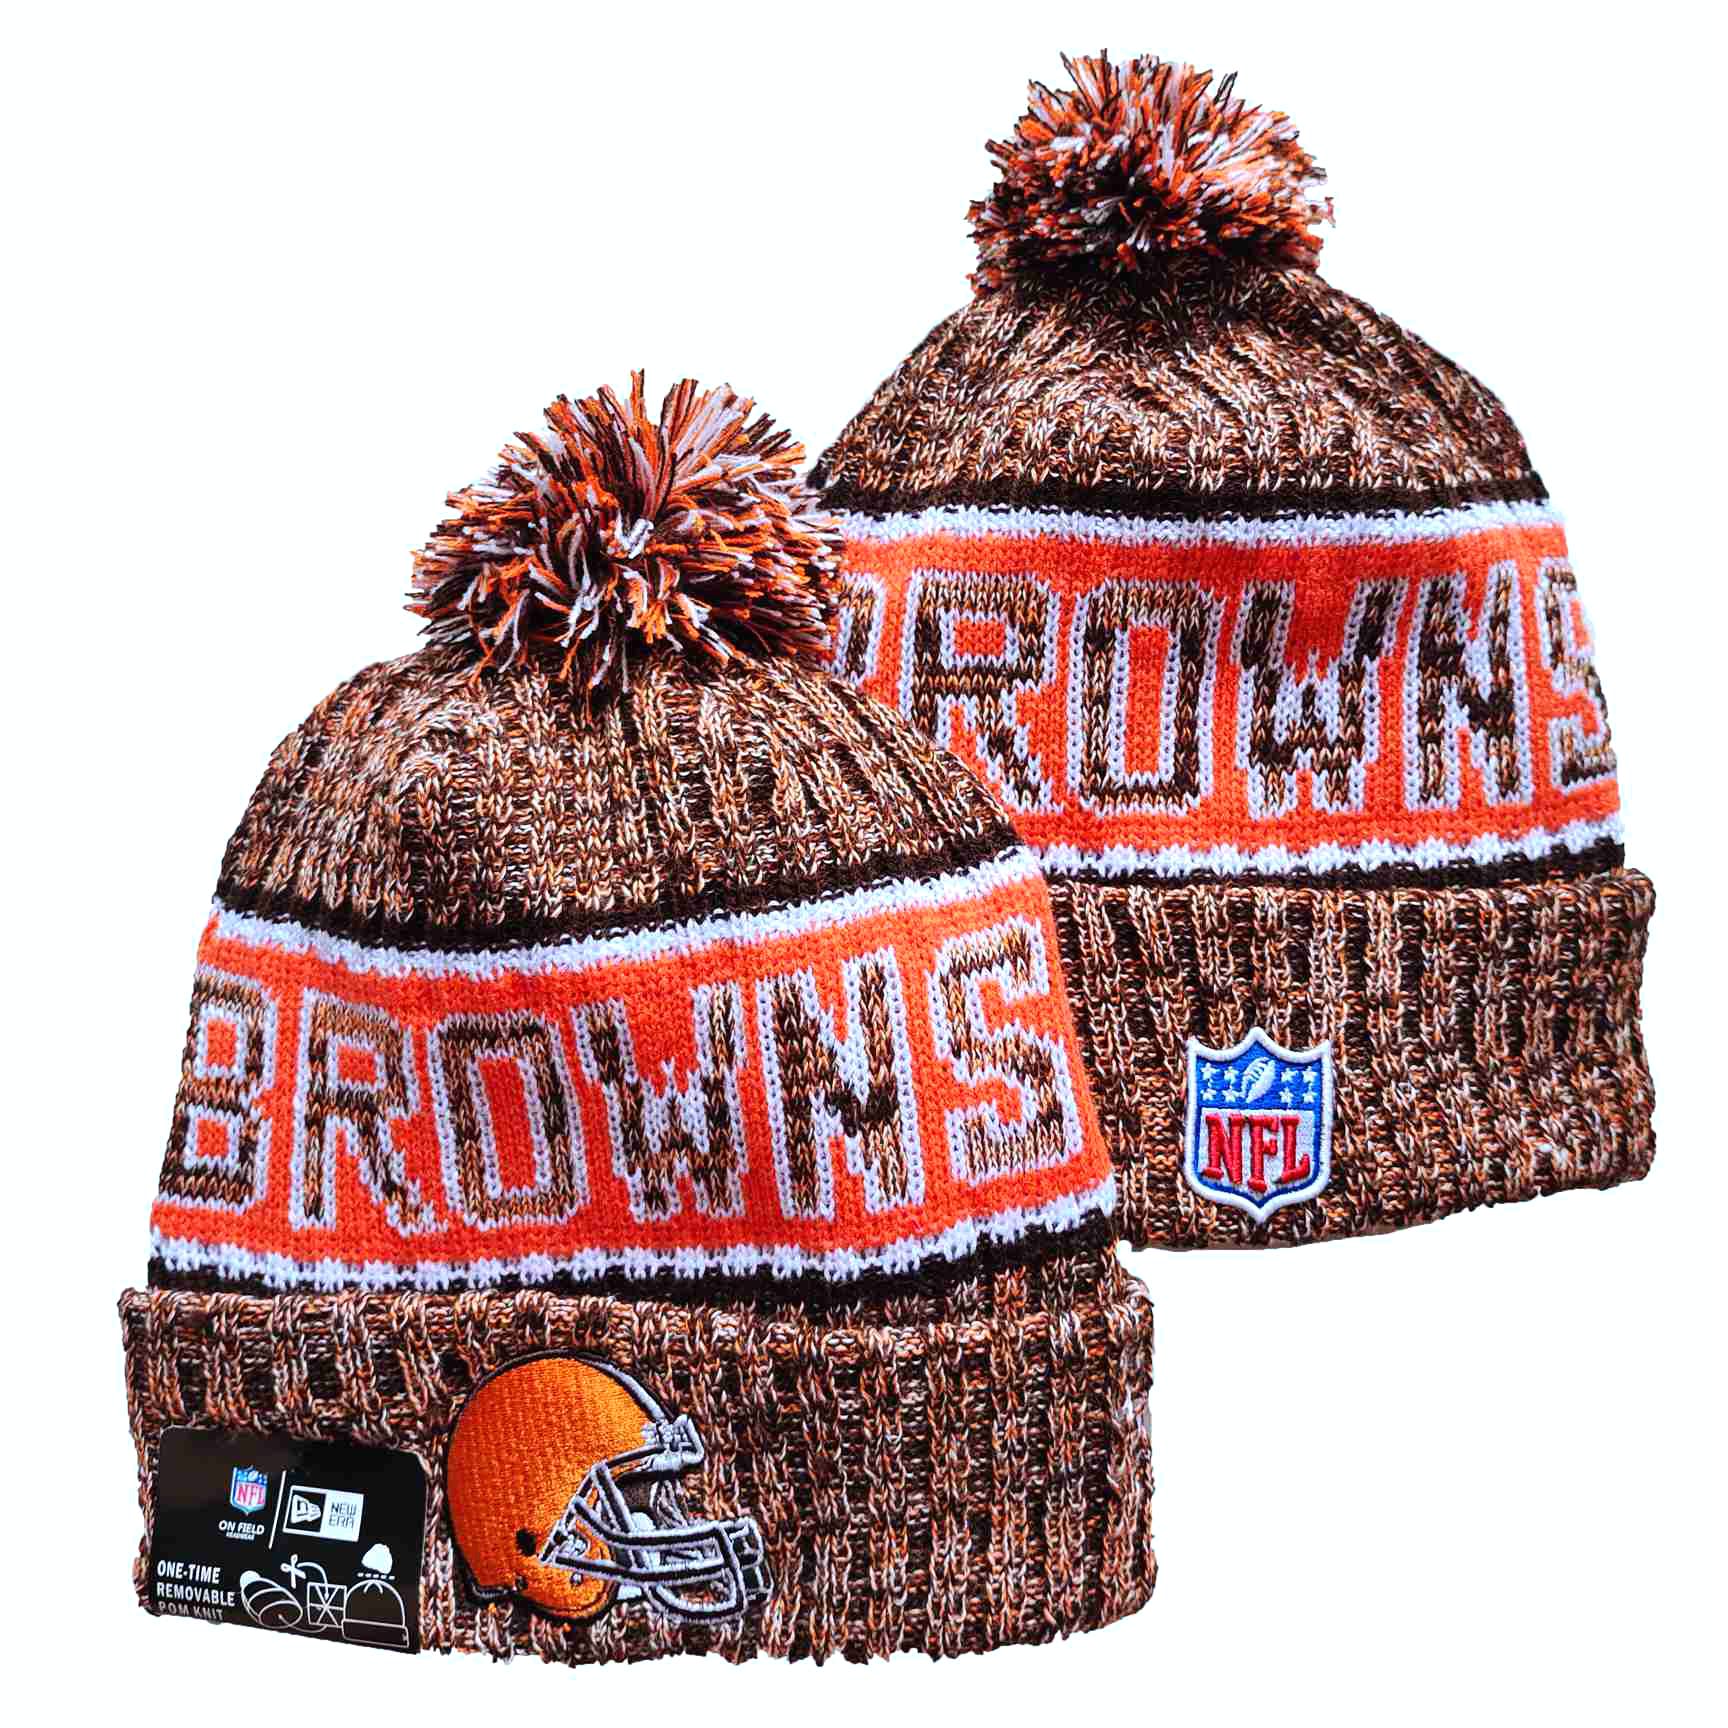 NFL Cleveland Browns Beanies Knit Hats-YD1310